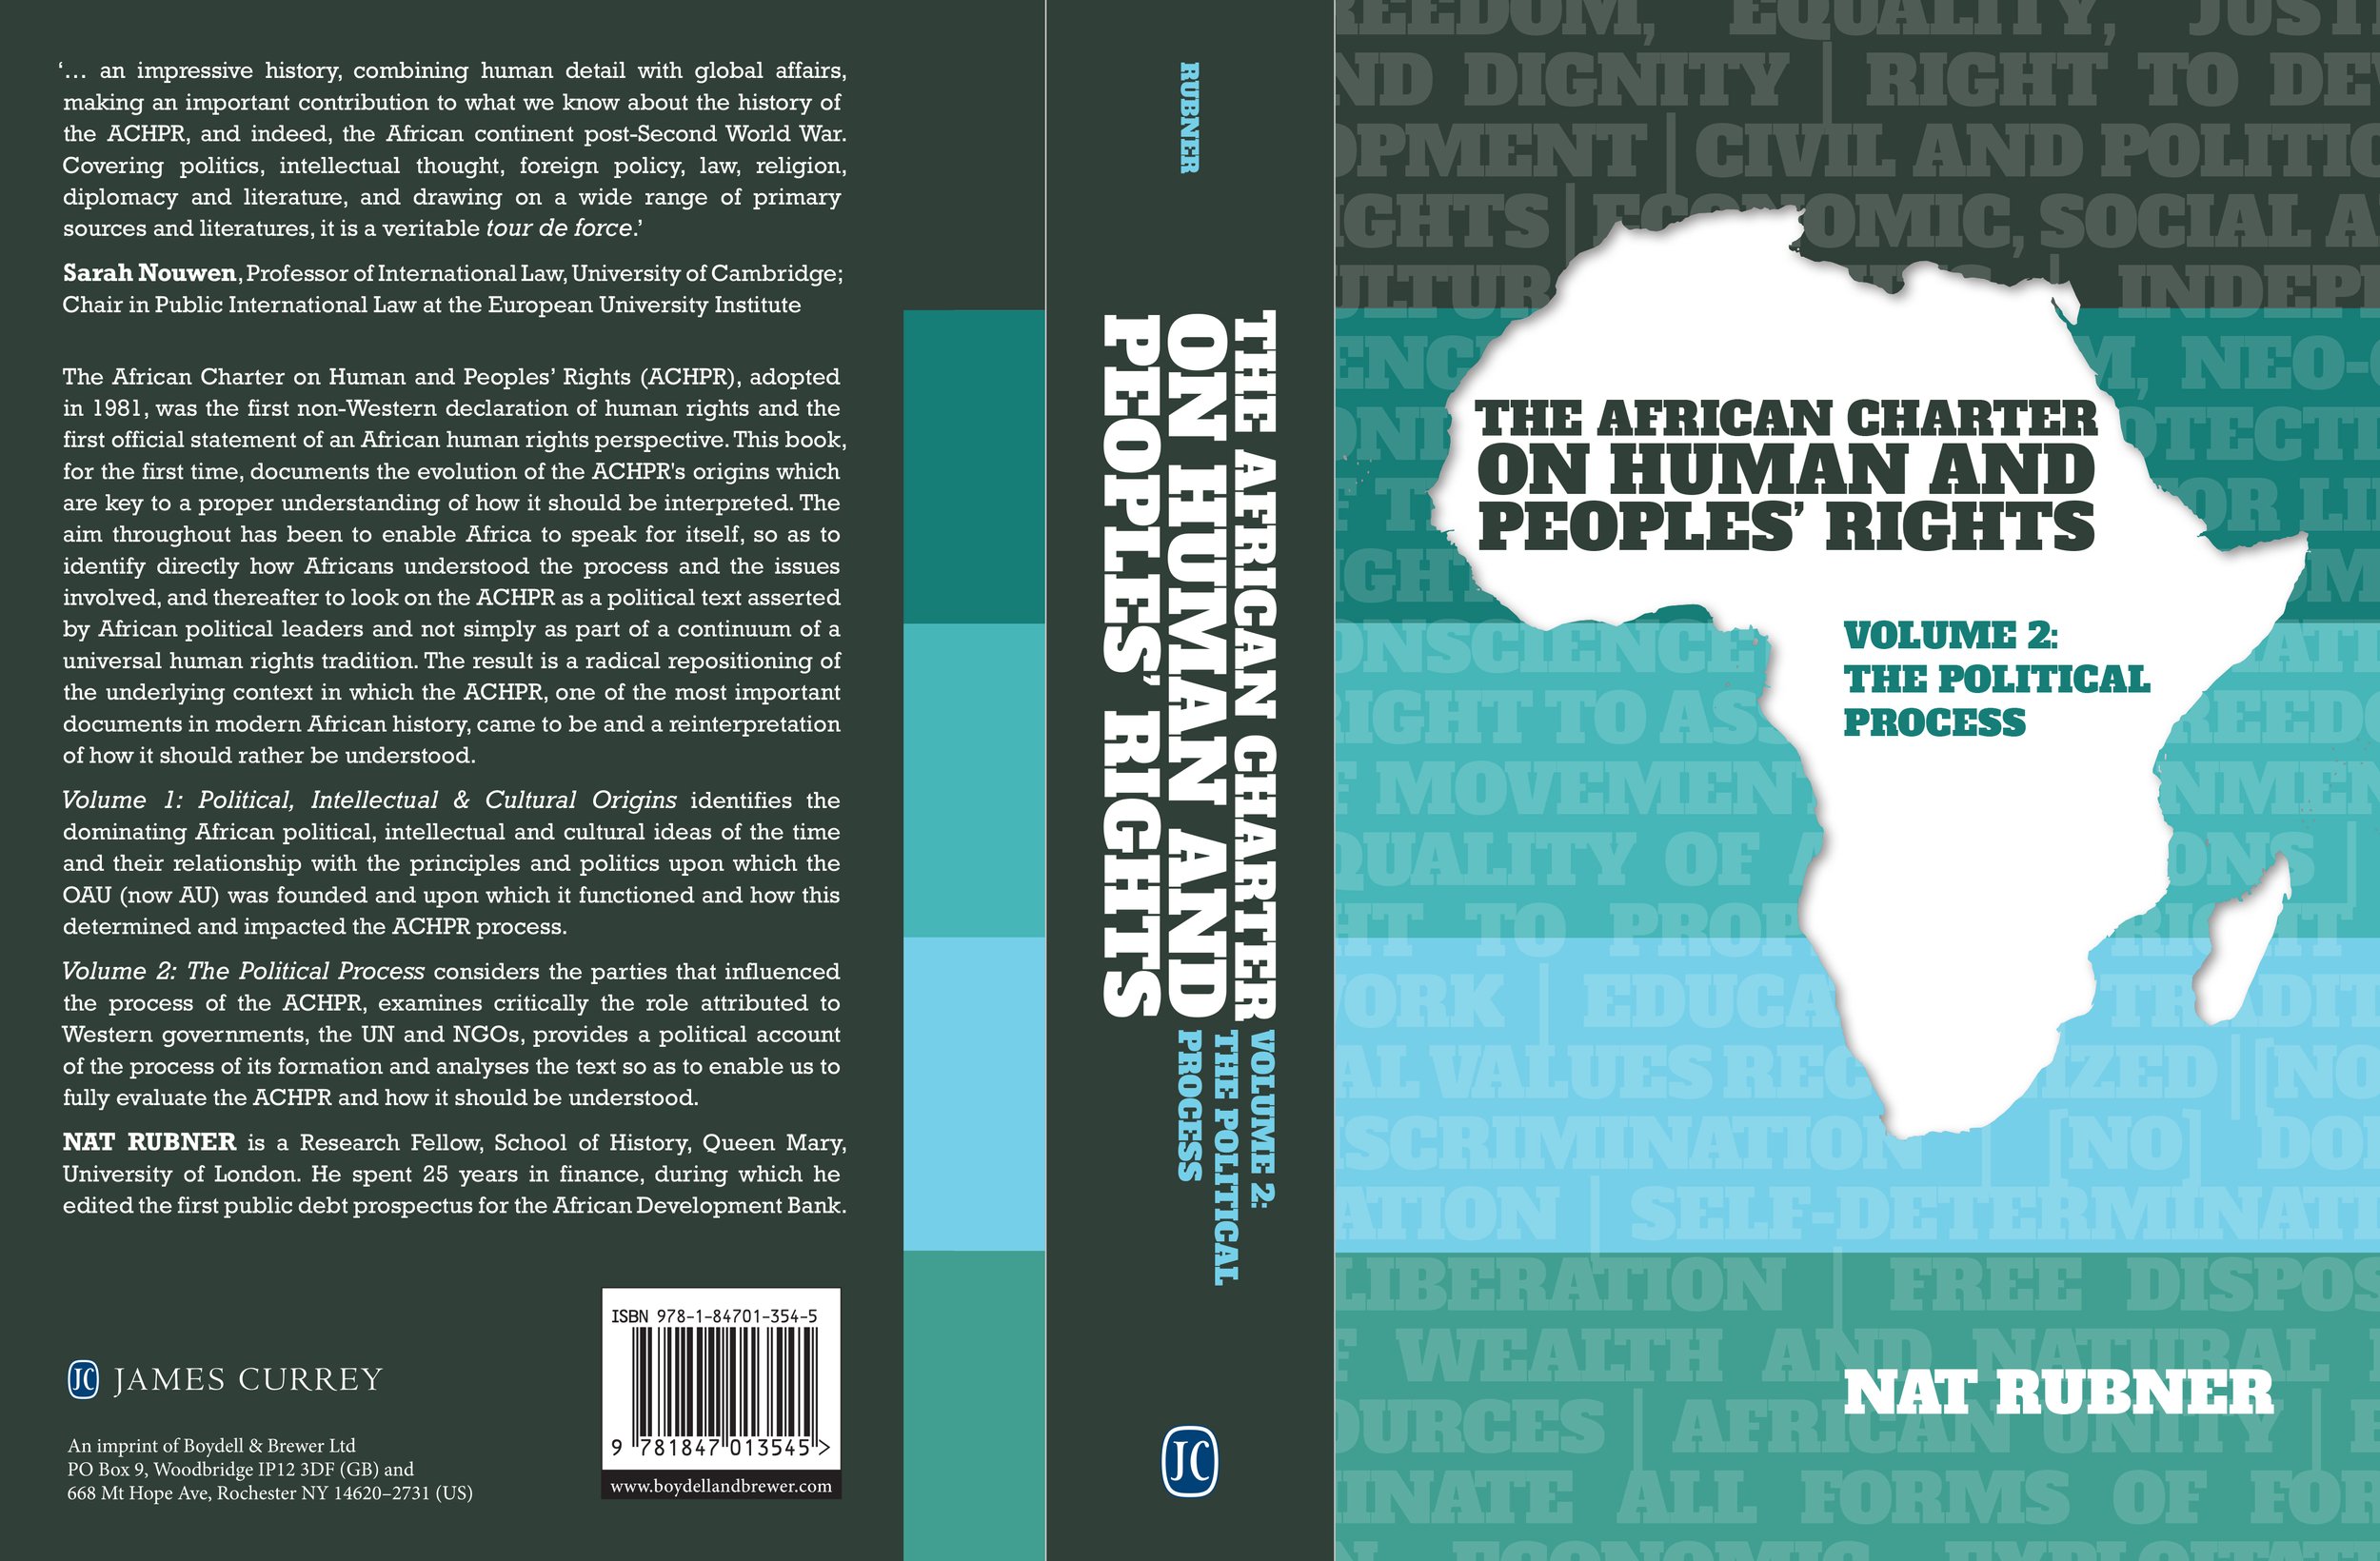 The African Charter on Human and Peoples’ Rights (Volume 2)